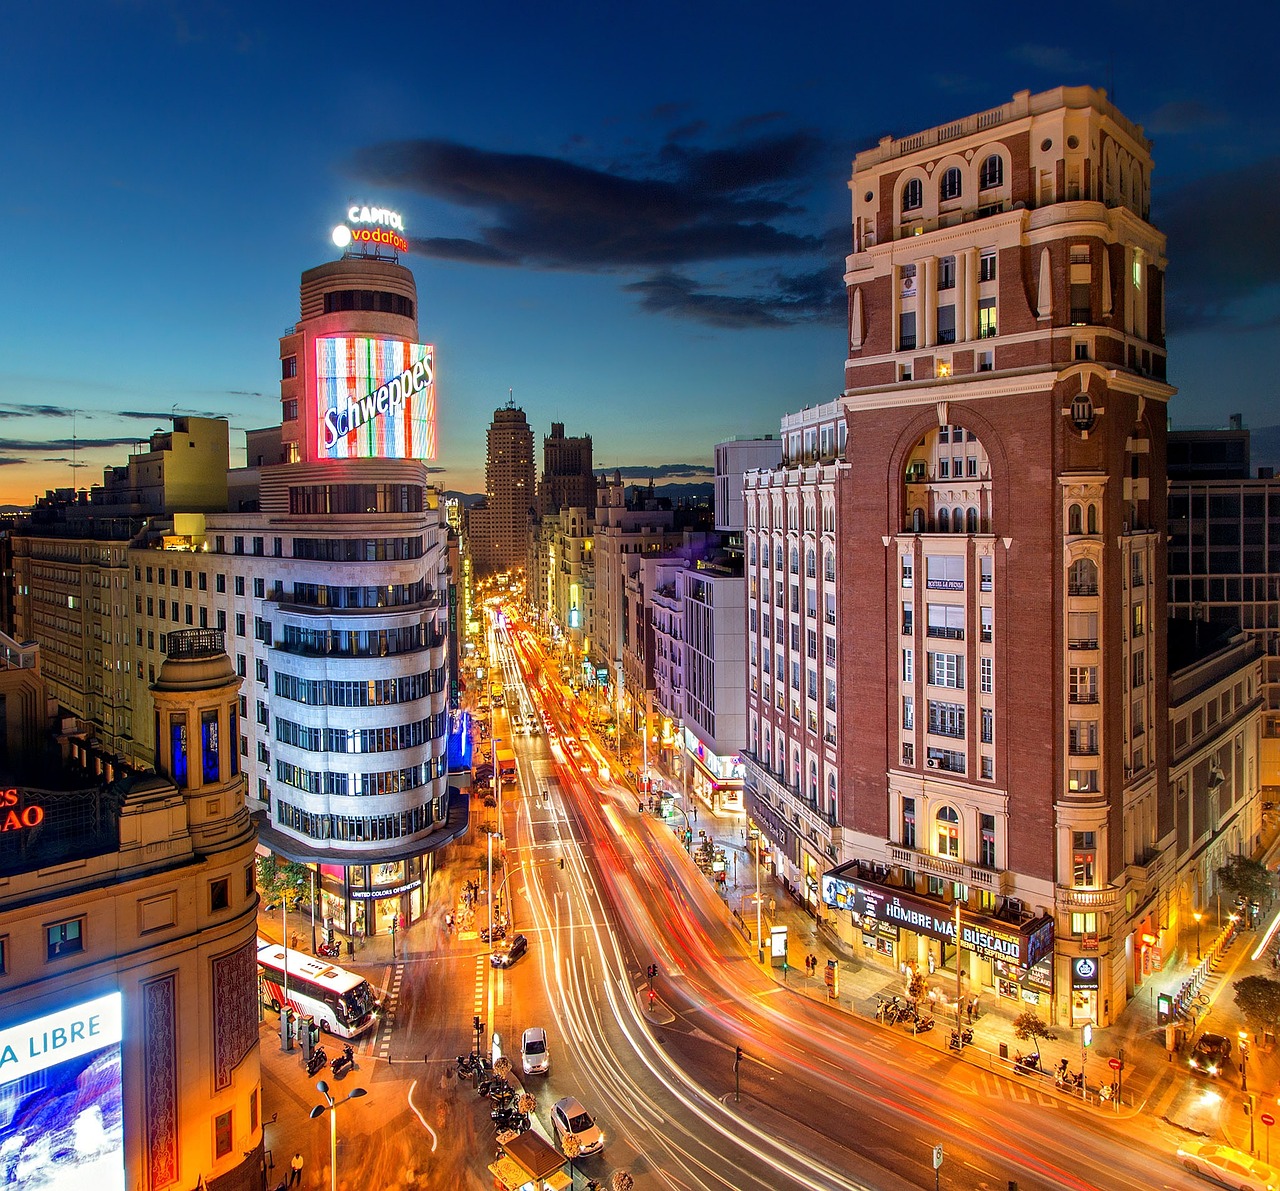 Art, Culture, and Gastronomy in Madrid